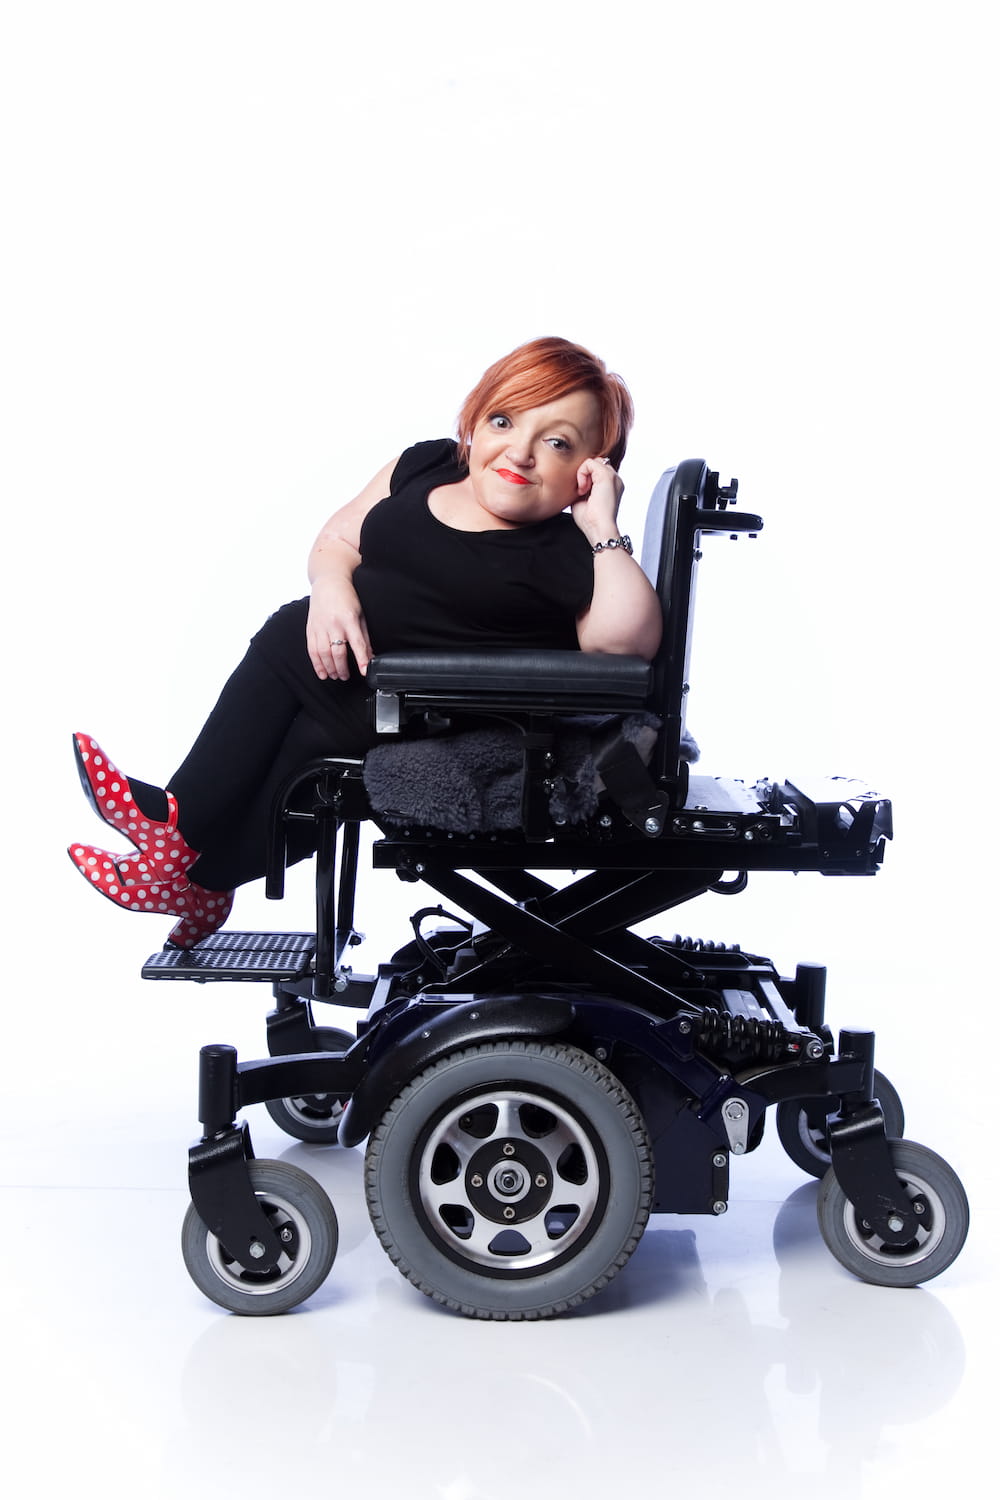 Studio photo of Stella relaxing in her wheelchair smiling at the camera. She's wearing all black except for red shoes with white polka dots.